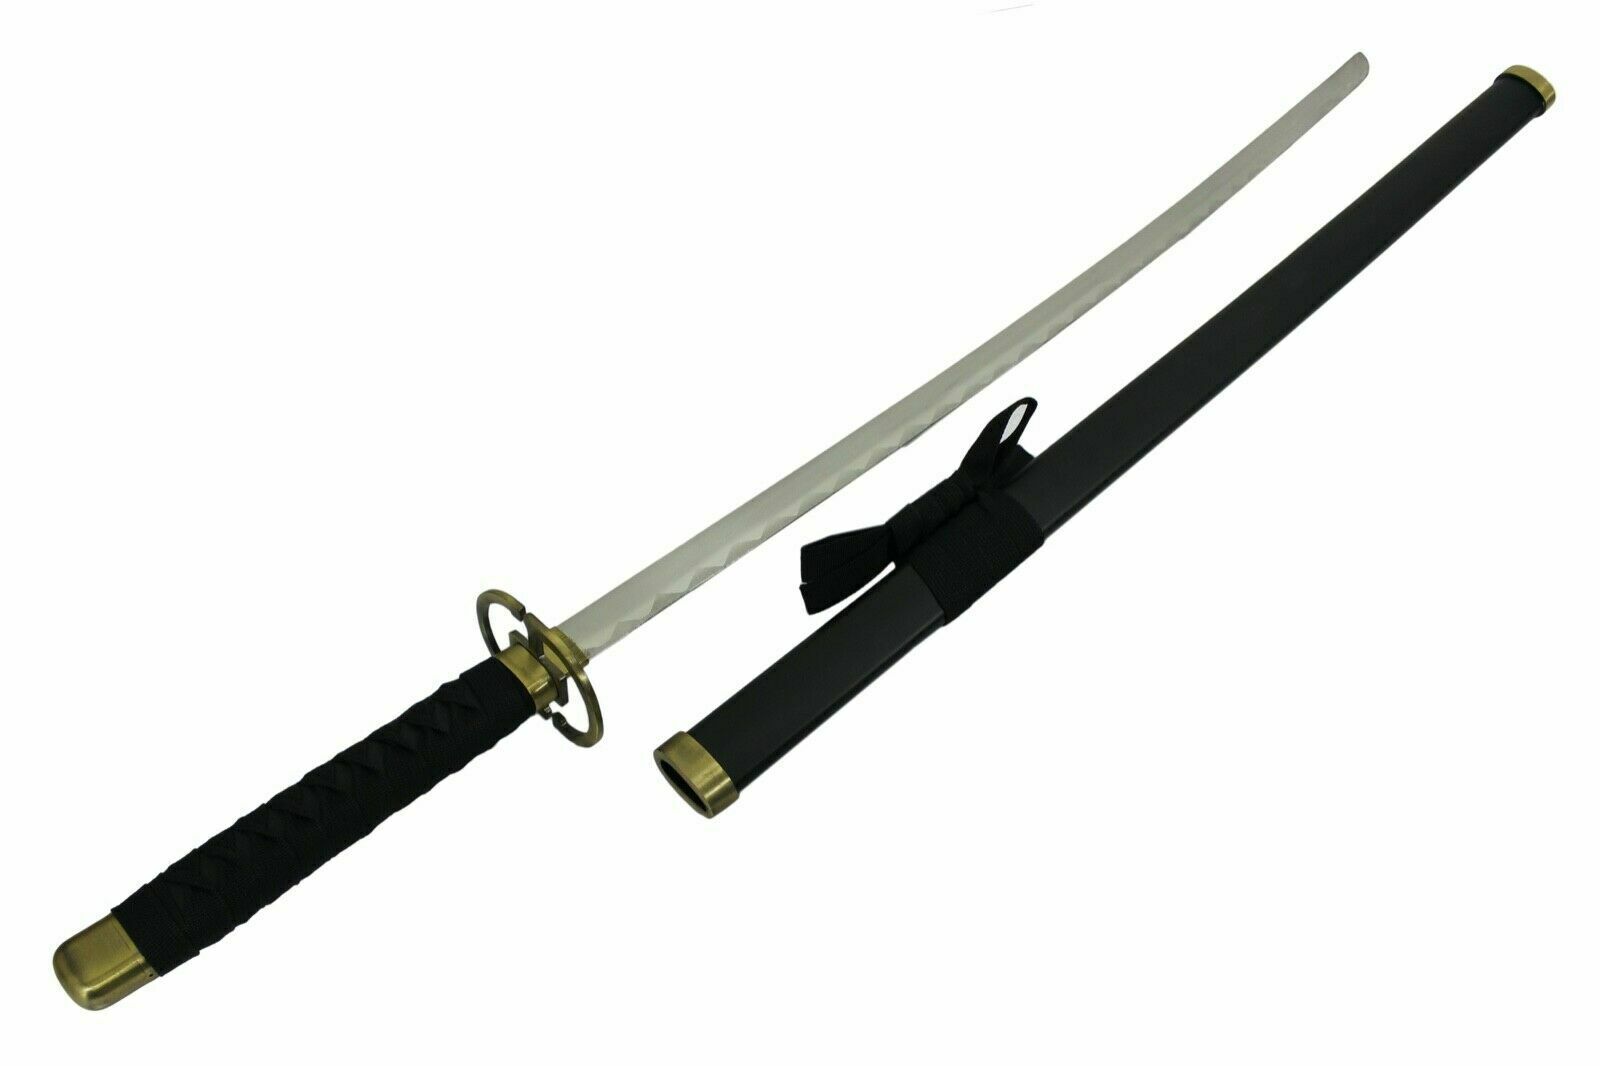 Roronoa Zoro Swords for sale | From One Piece